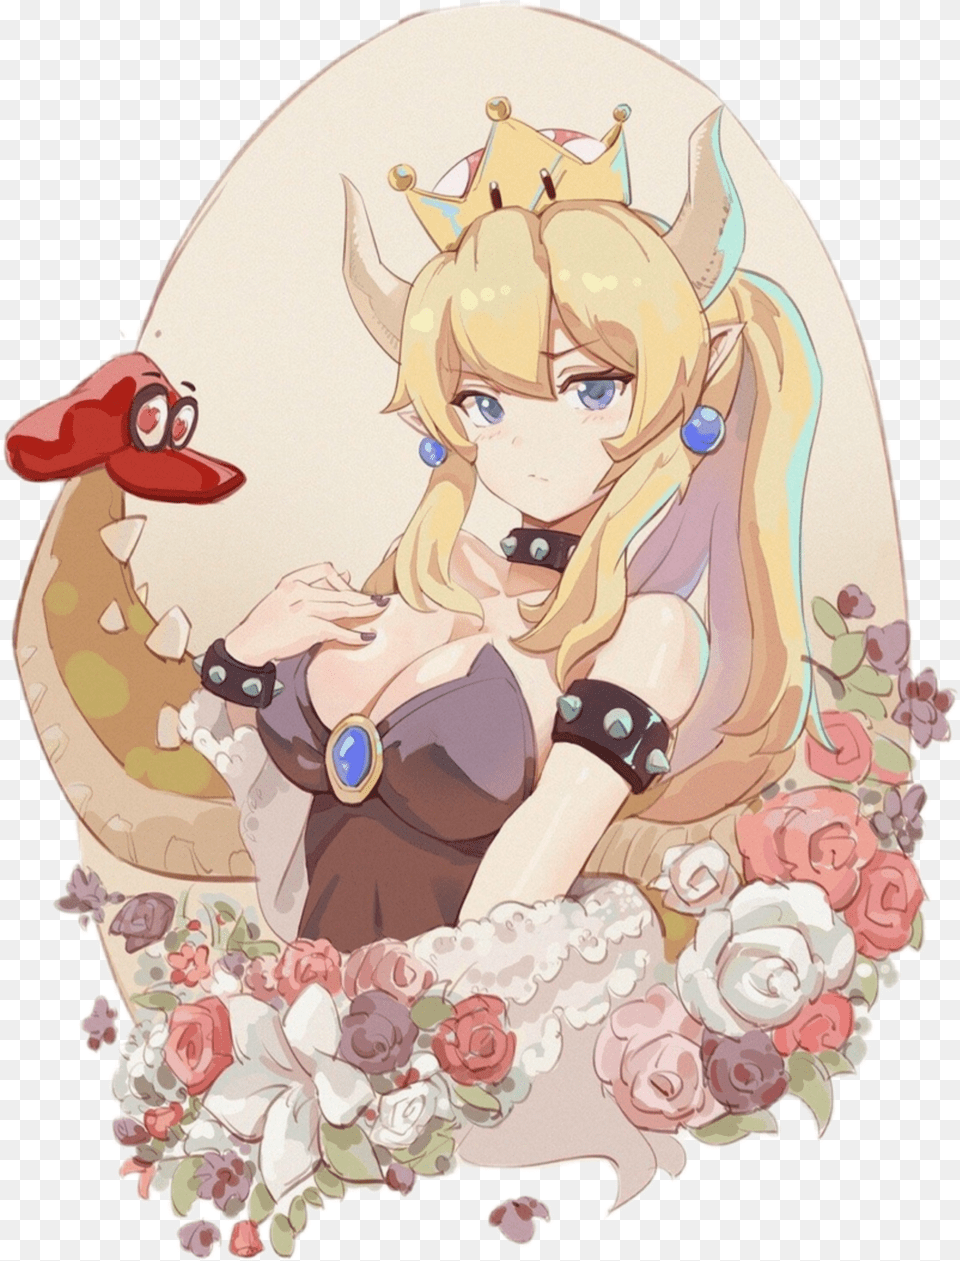 Freetoeditbowsette Bower Waifu Remixit In 2020 Anime Smug Queen Anime Free Png